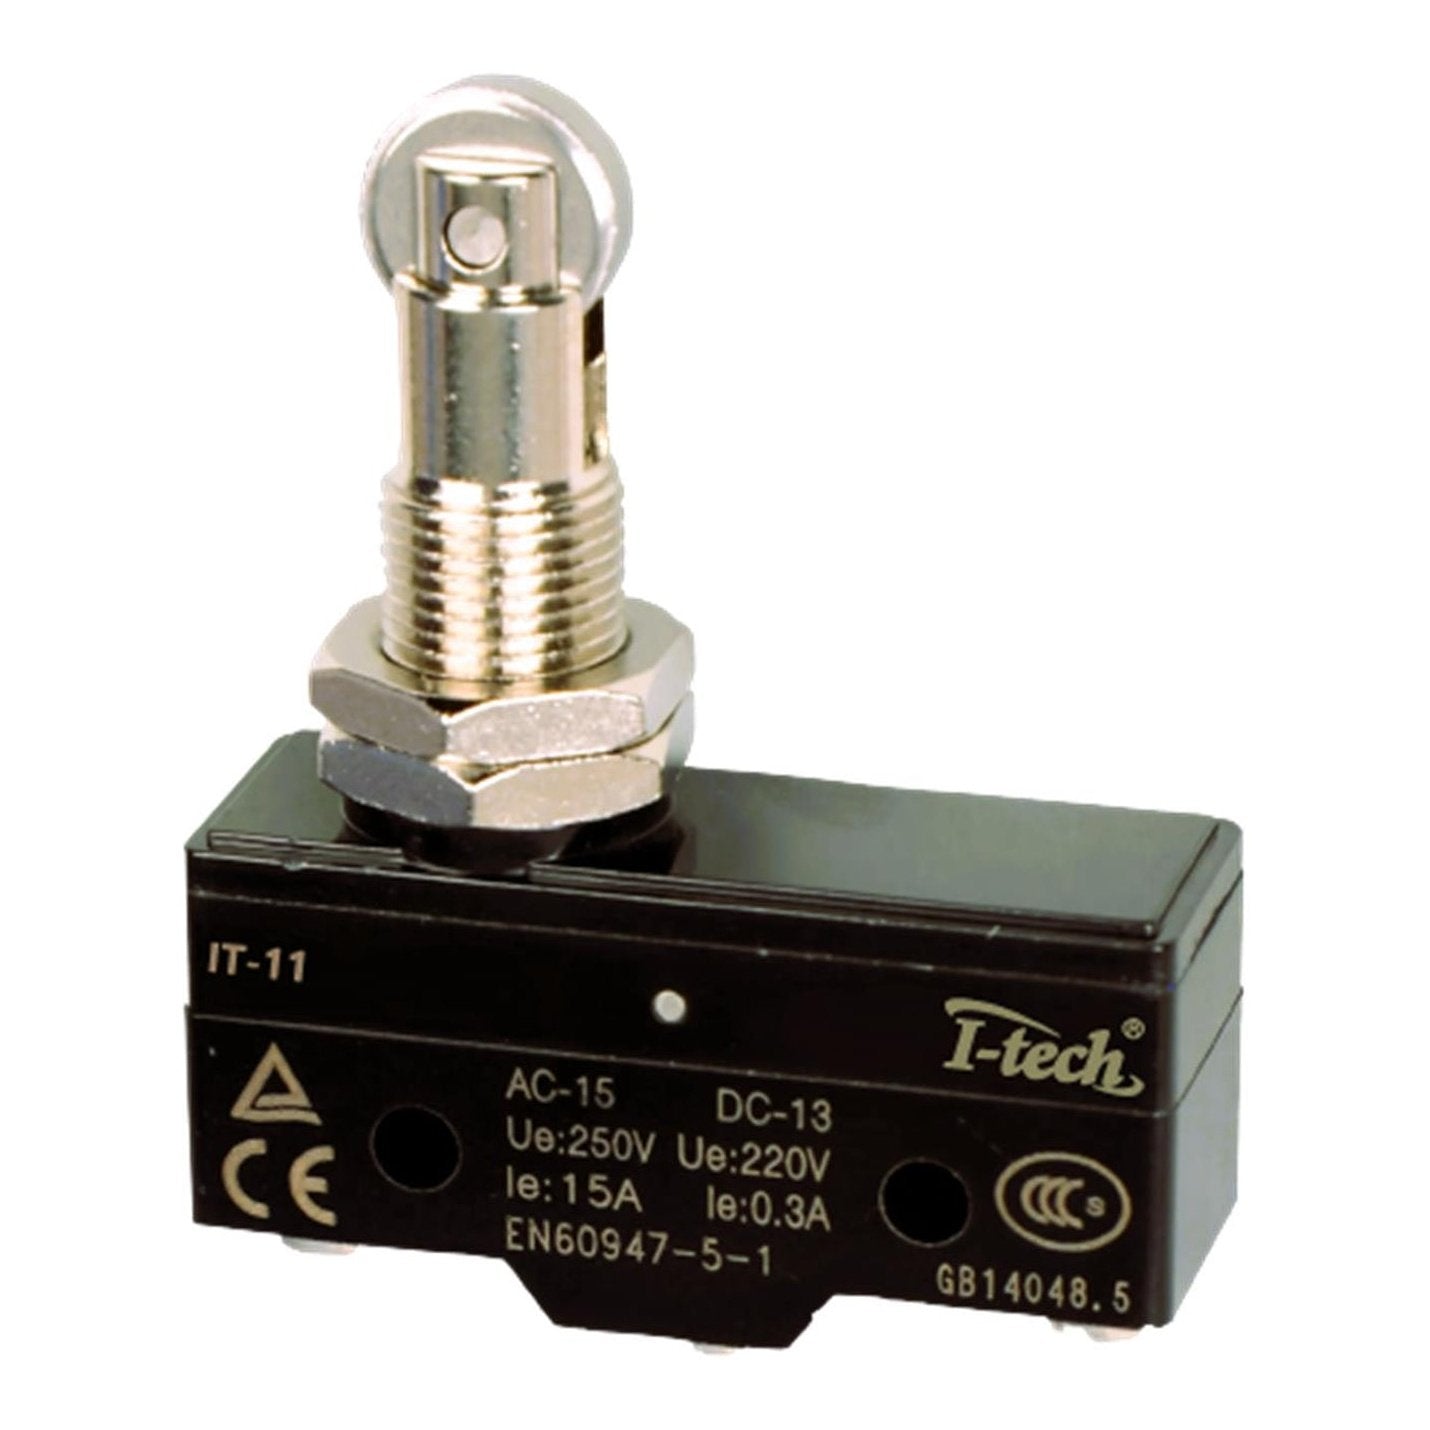 i-tech Micro Switch IT-11(replacement for z15gq22b & cm1308)